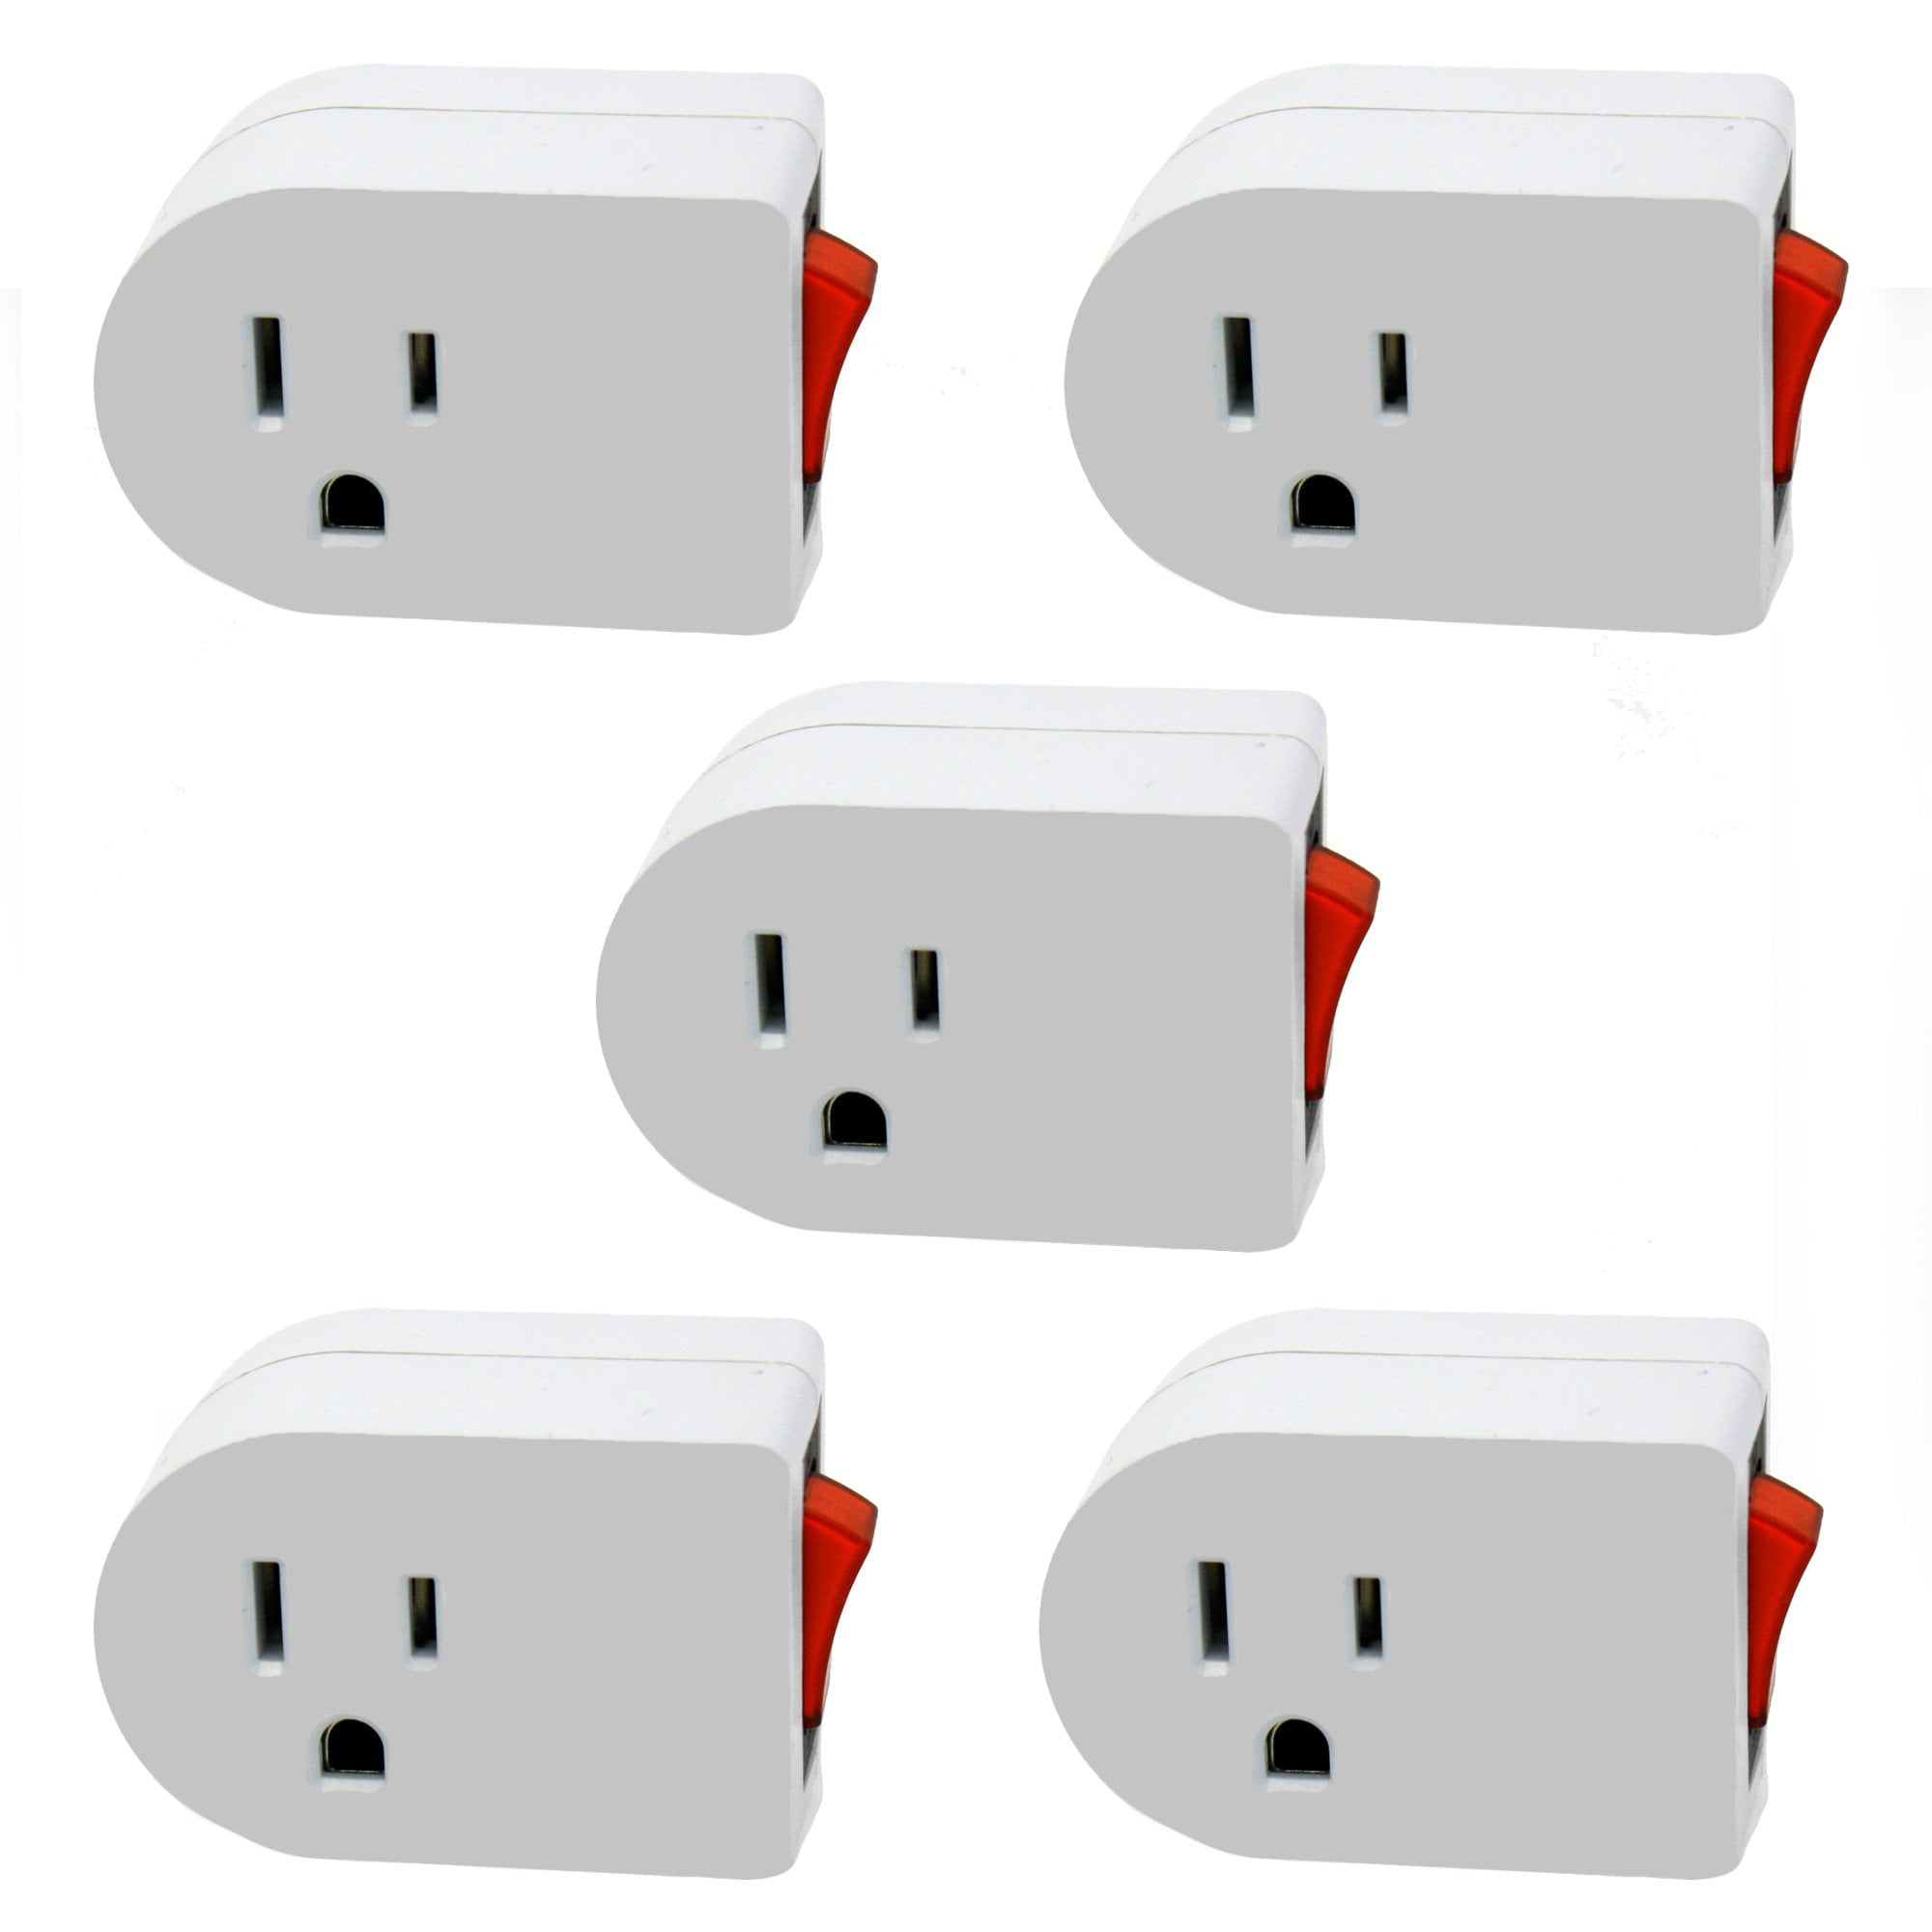 3 outlet 3 prong swivel grounded electric plug wall tap space saver UL 